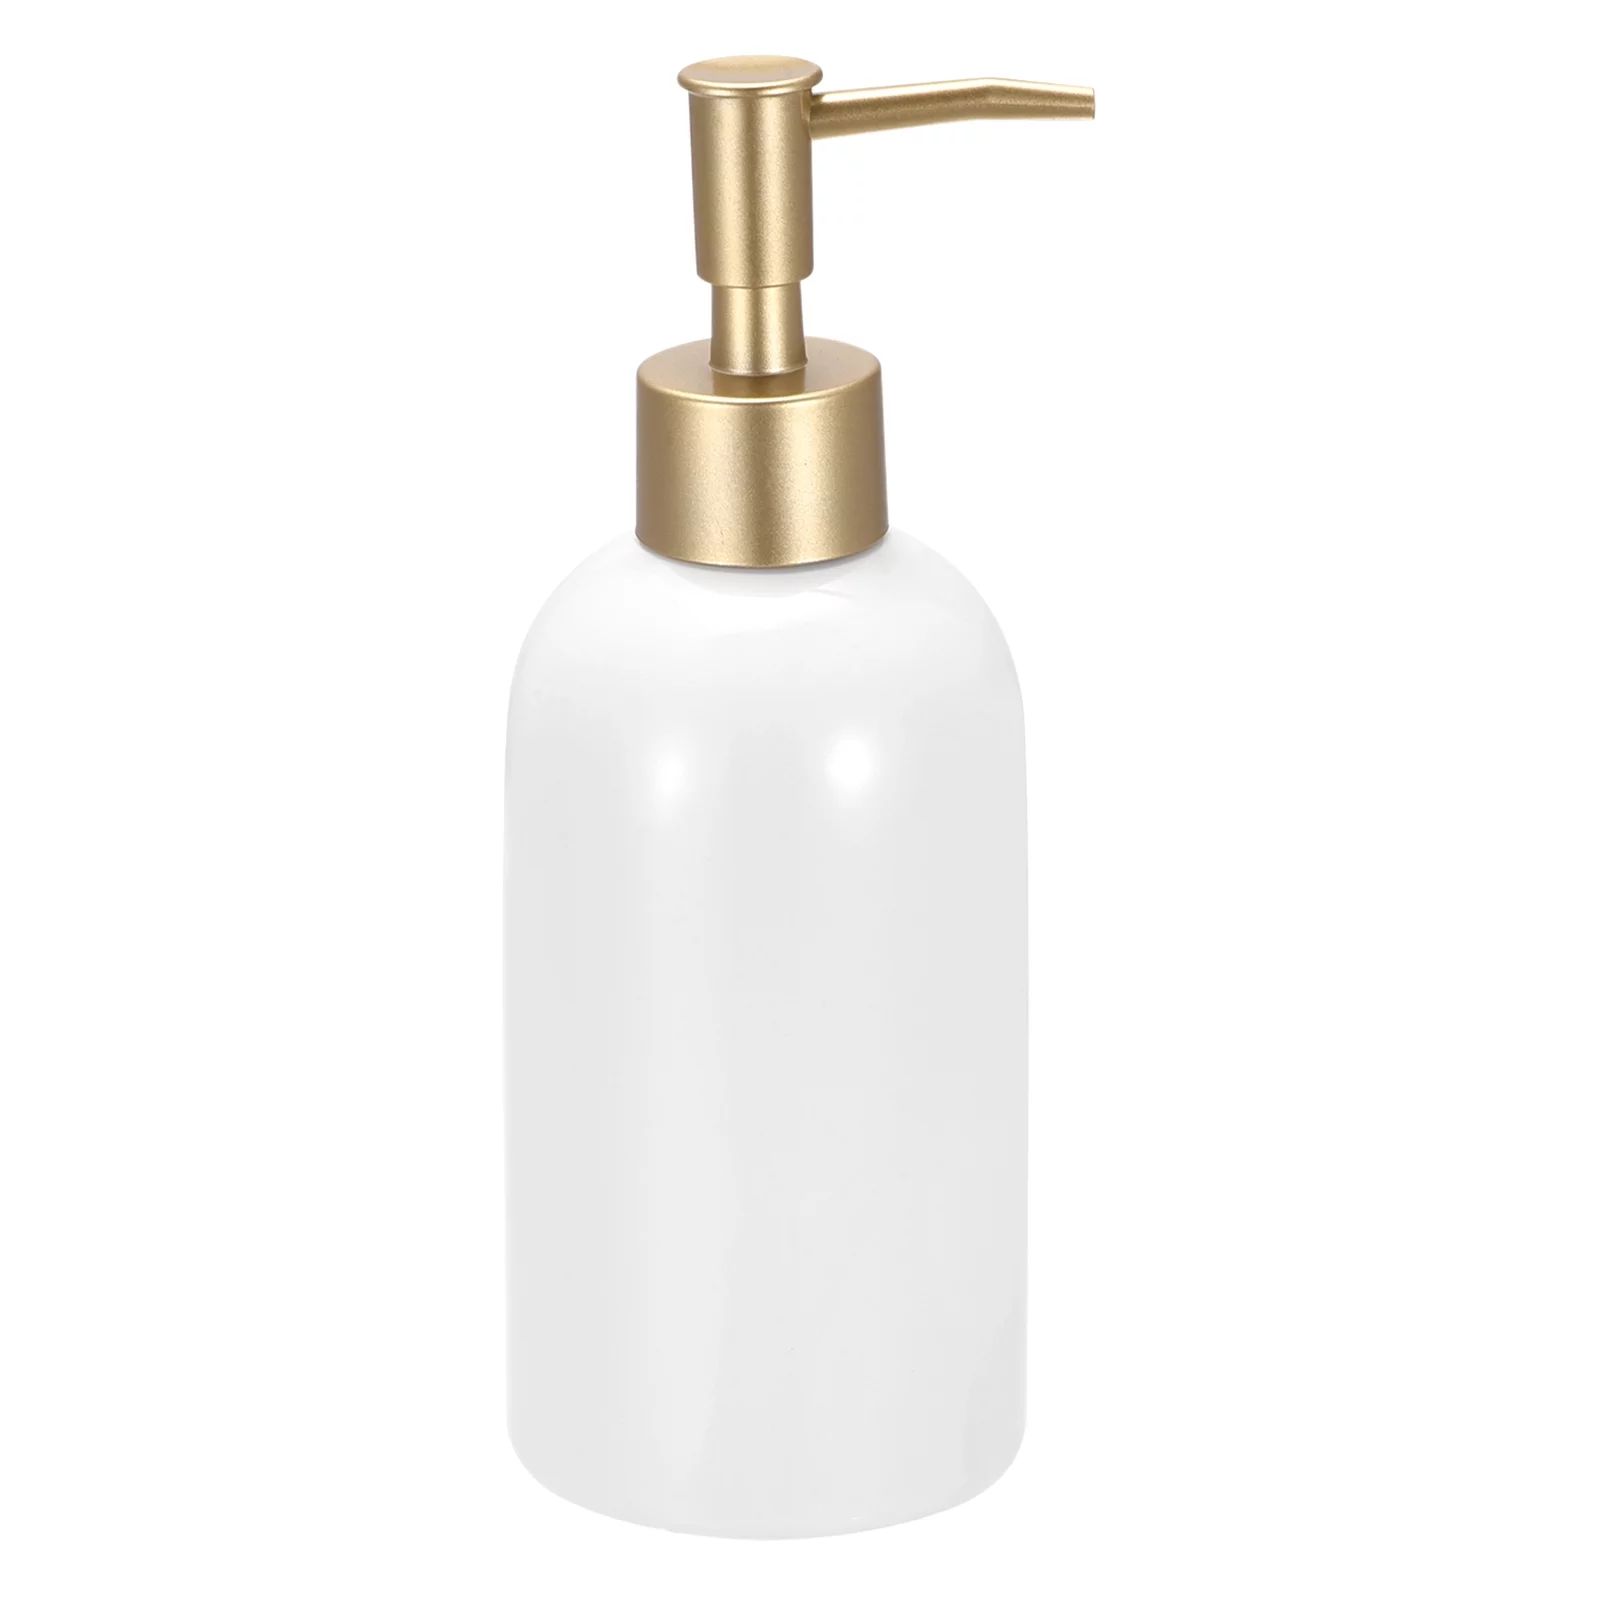 Uxcell Soap Dispenser-14Oz Ceramic Dish Hand Soap Dispenser with Stainless Steel Pump for Kitchen... | Walmart (US)